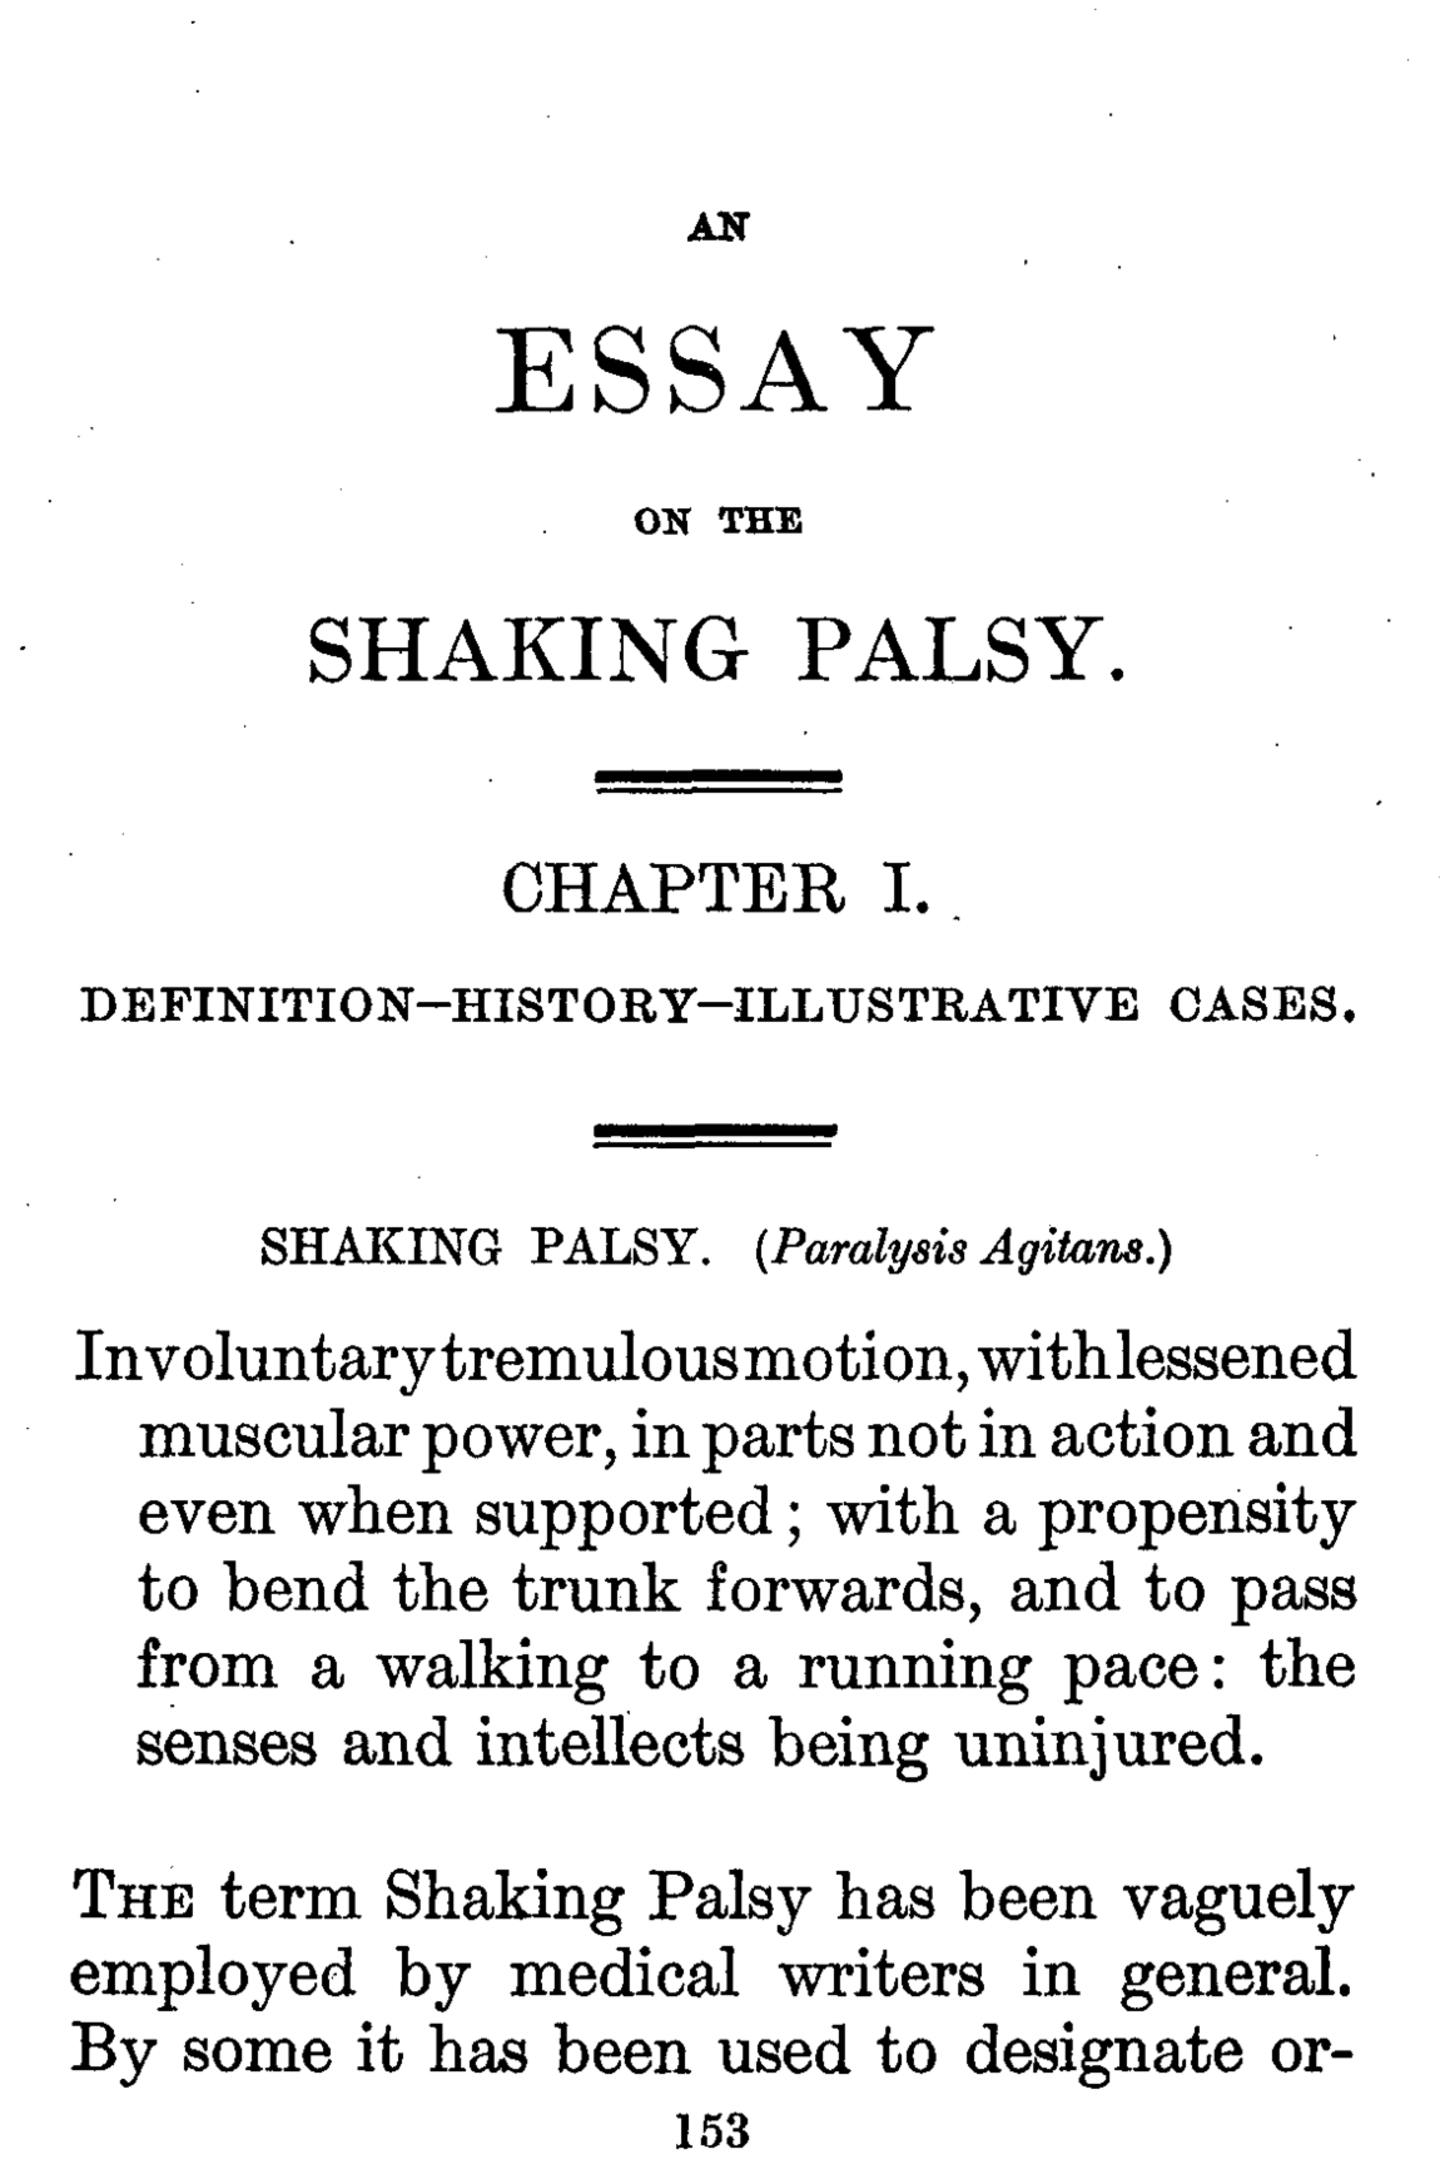 First page of James Parkinson's "An Essay on the Shaking Palsy."